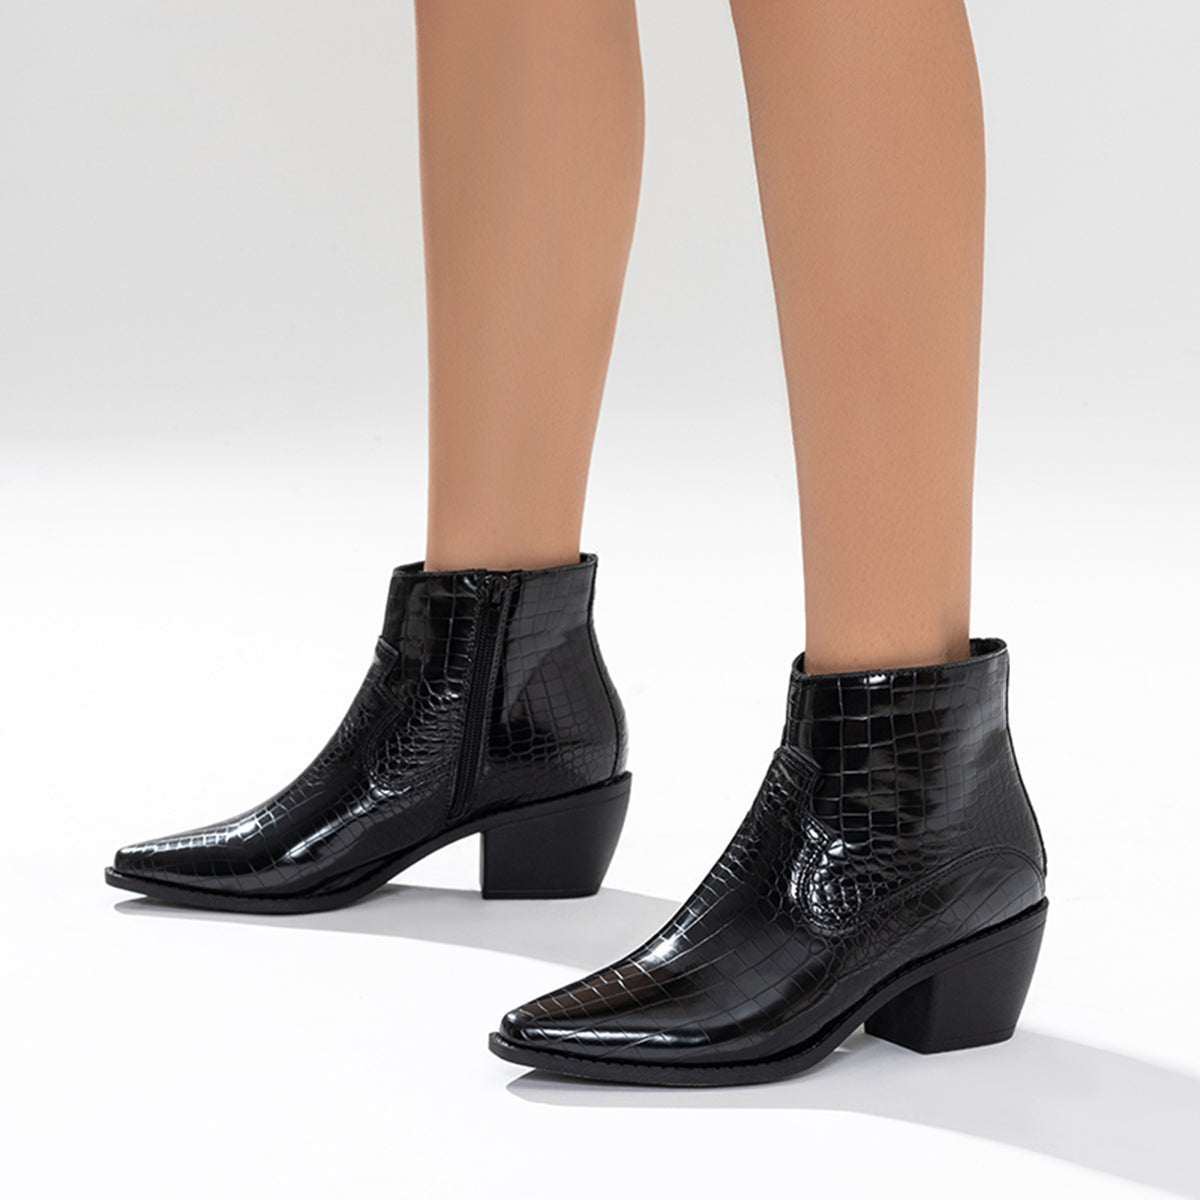 Veooy Black Western Ankle Boots Side Zipper Chunky Block Heel Booties